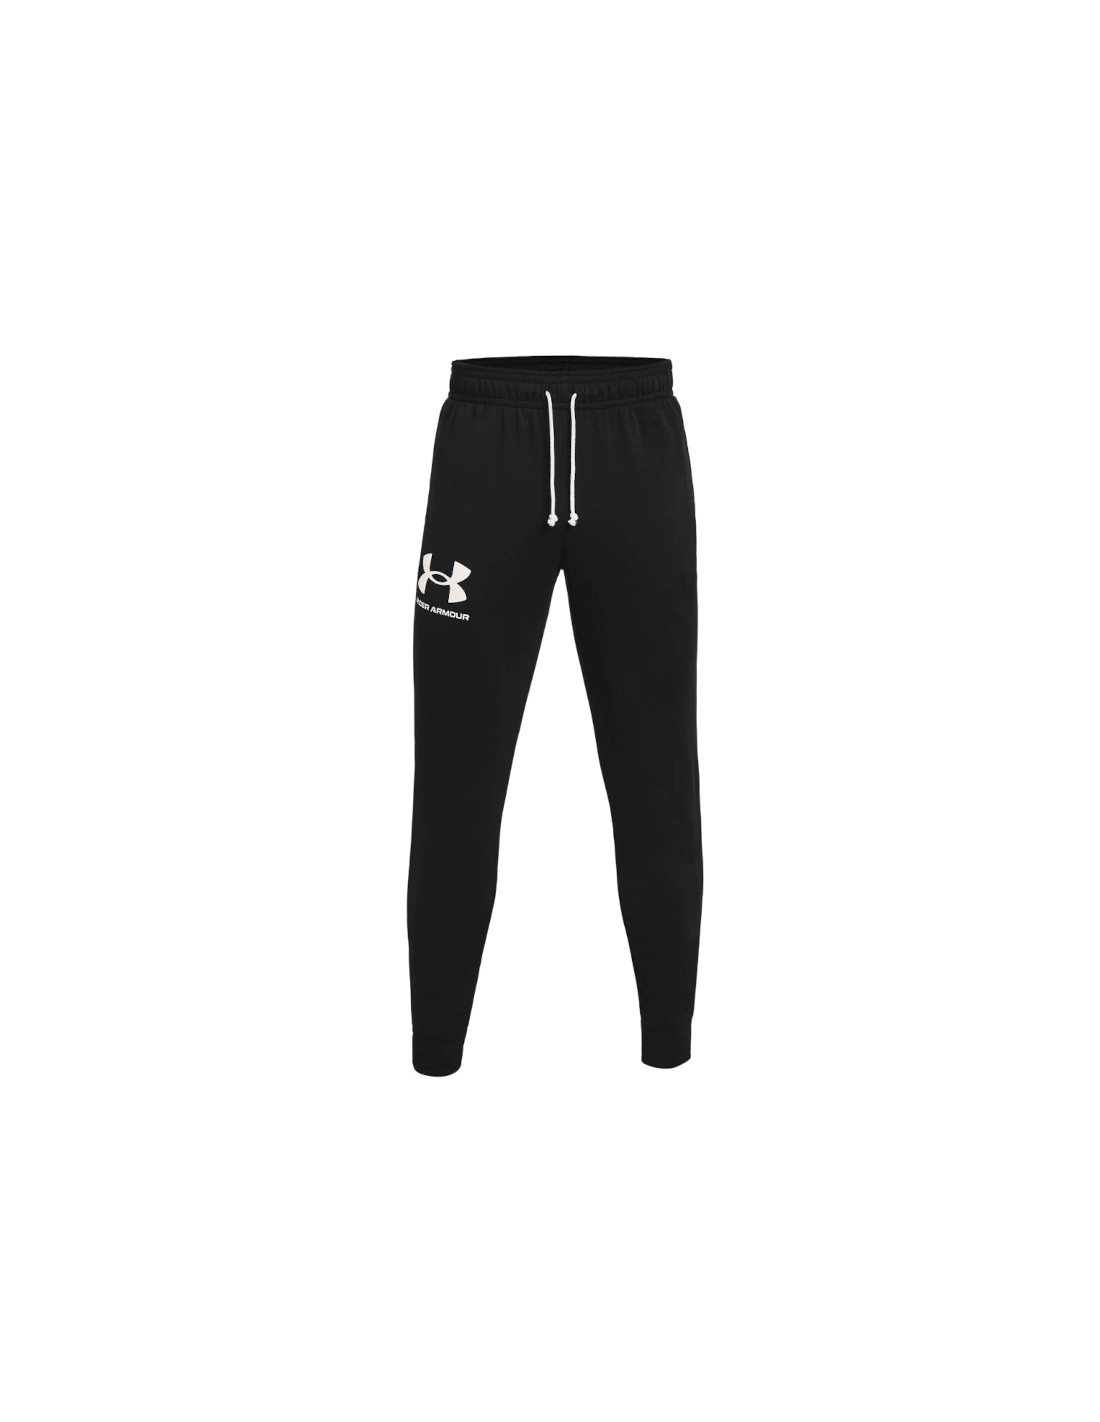  Under Armour Women's Rival Terry Joggers, (001) Black